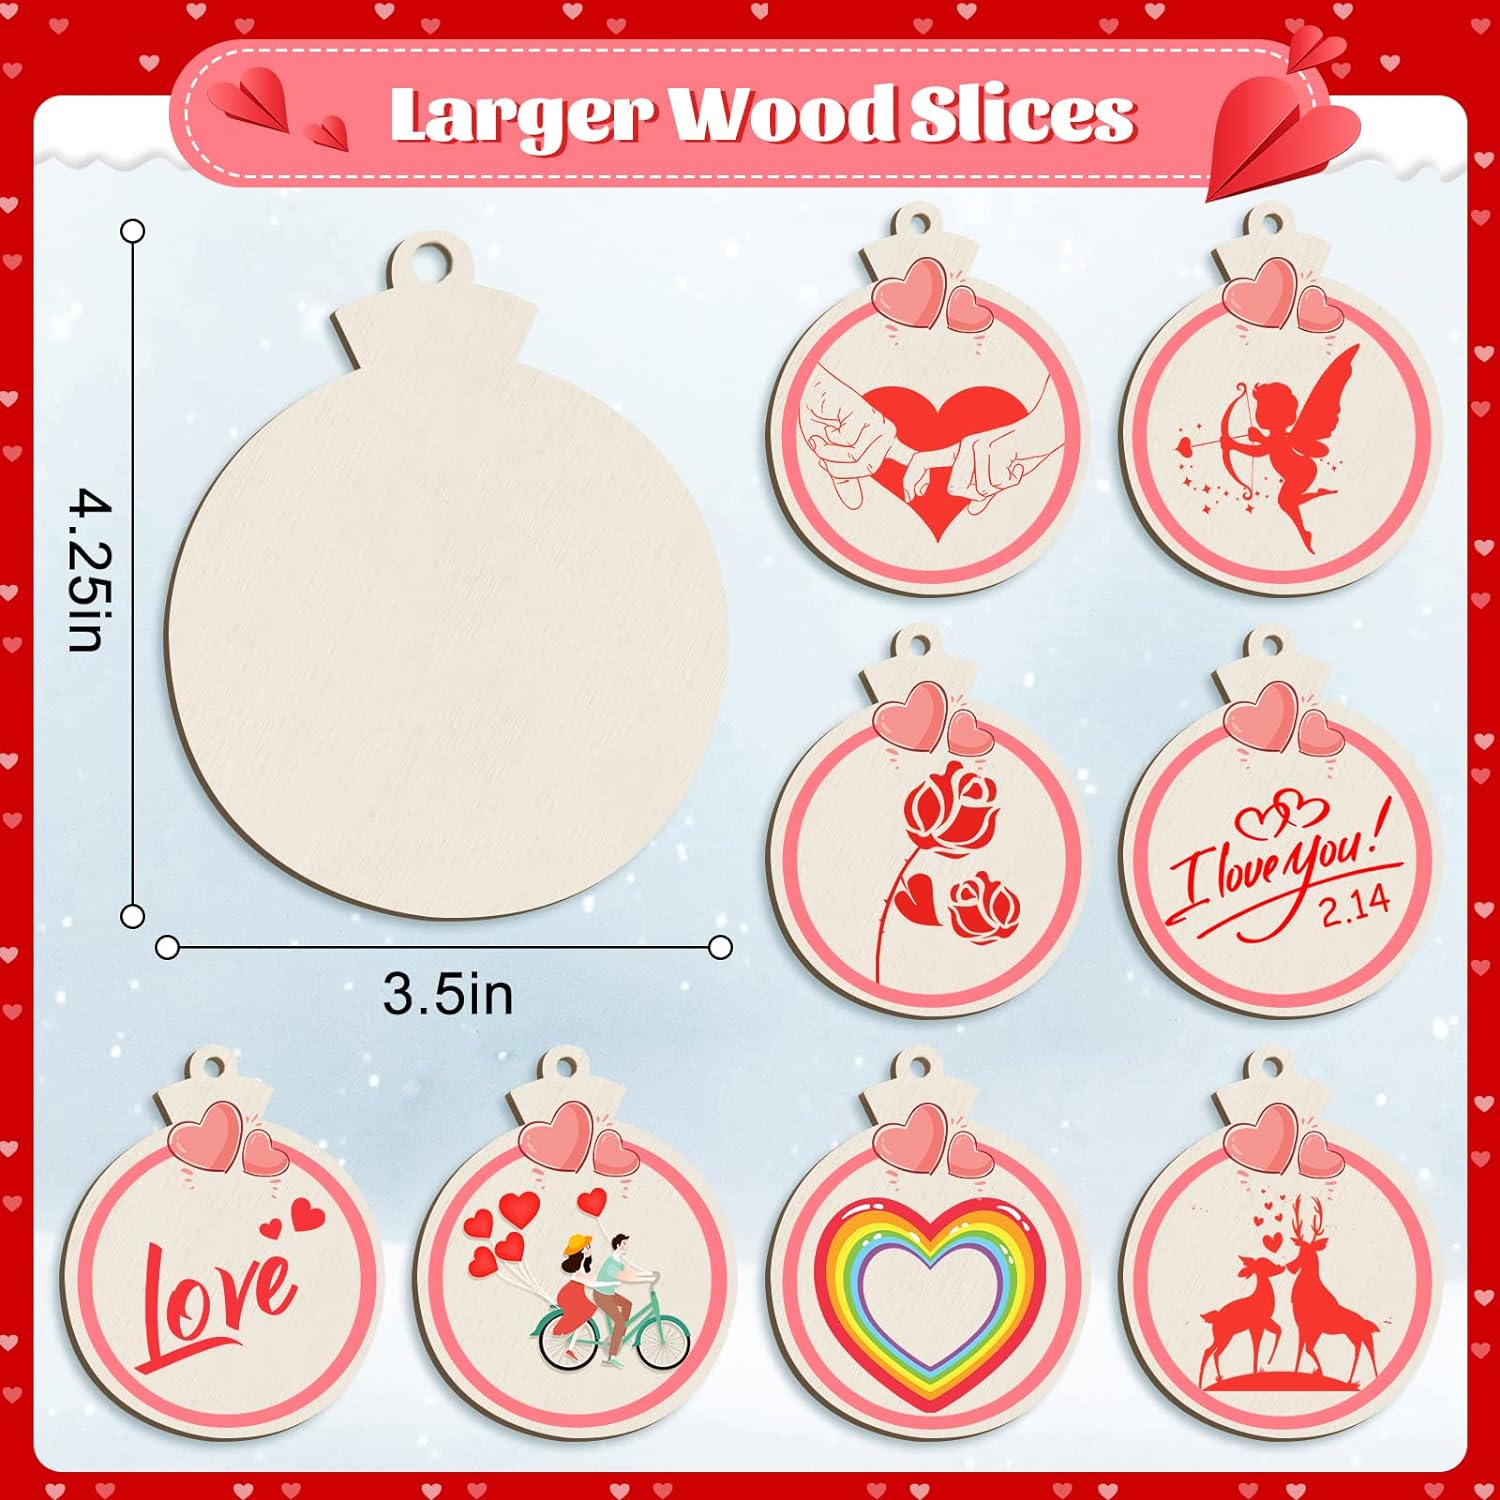 80PCS Valentines Day Wooden Ornaments for Crafts, 4" Valentine Ornaments for Tree, Unfinished Wood Slices 4 inch Circles Rounds Discs for Christmas's Day Decorations